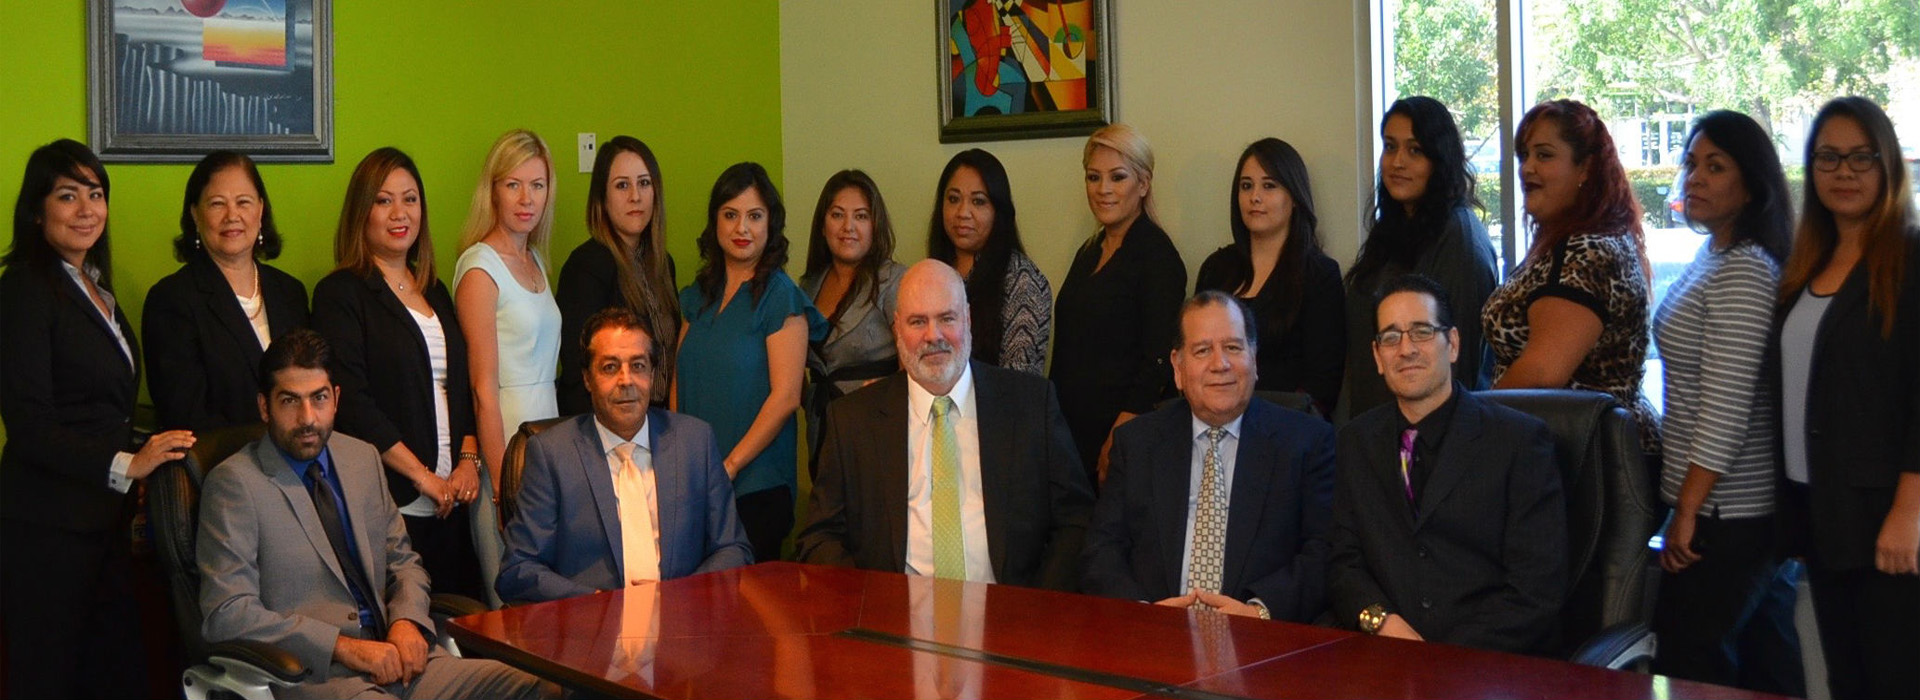 Our Attorneys & Staff